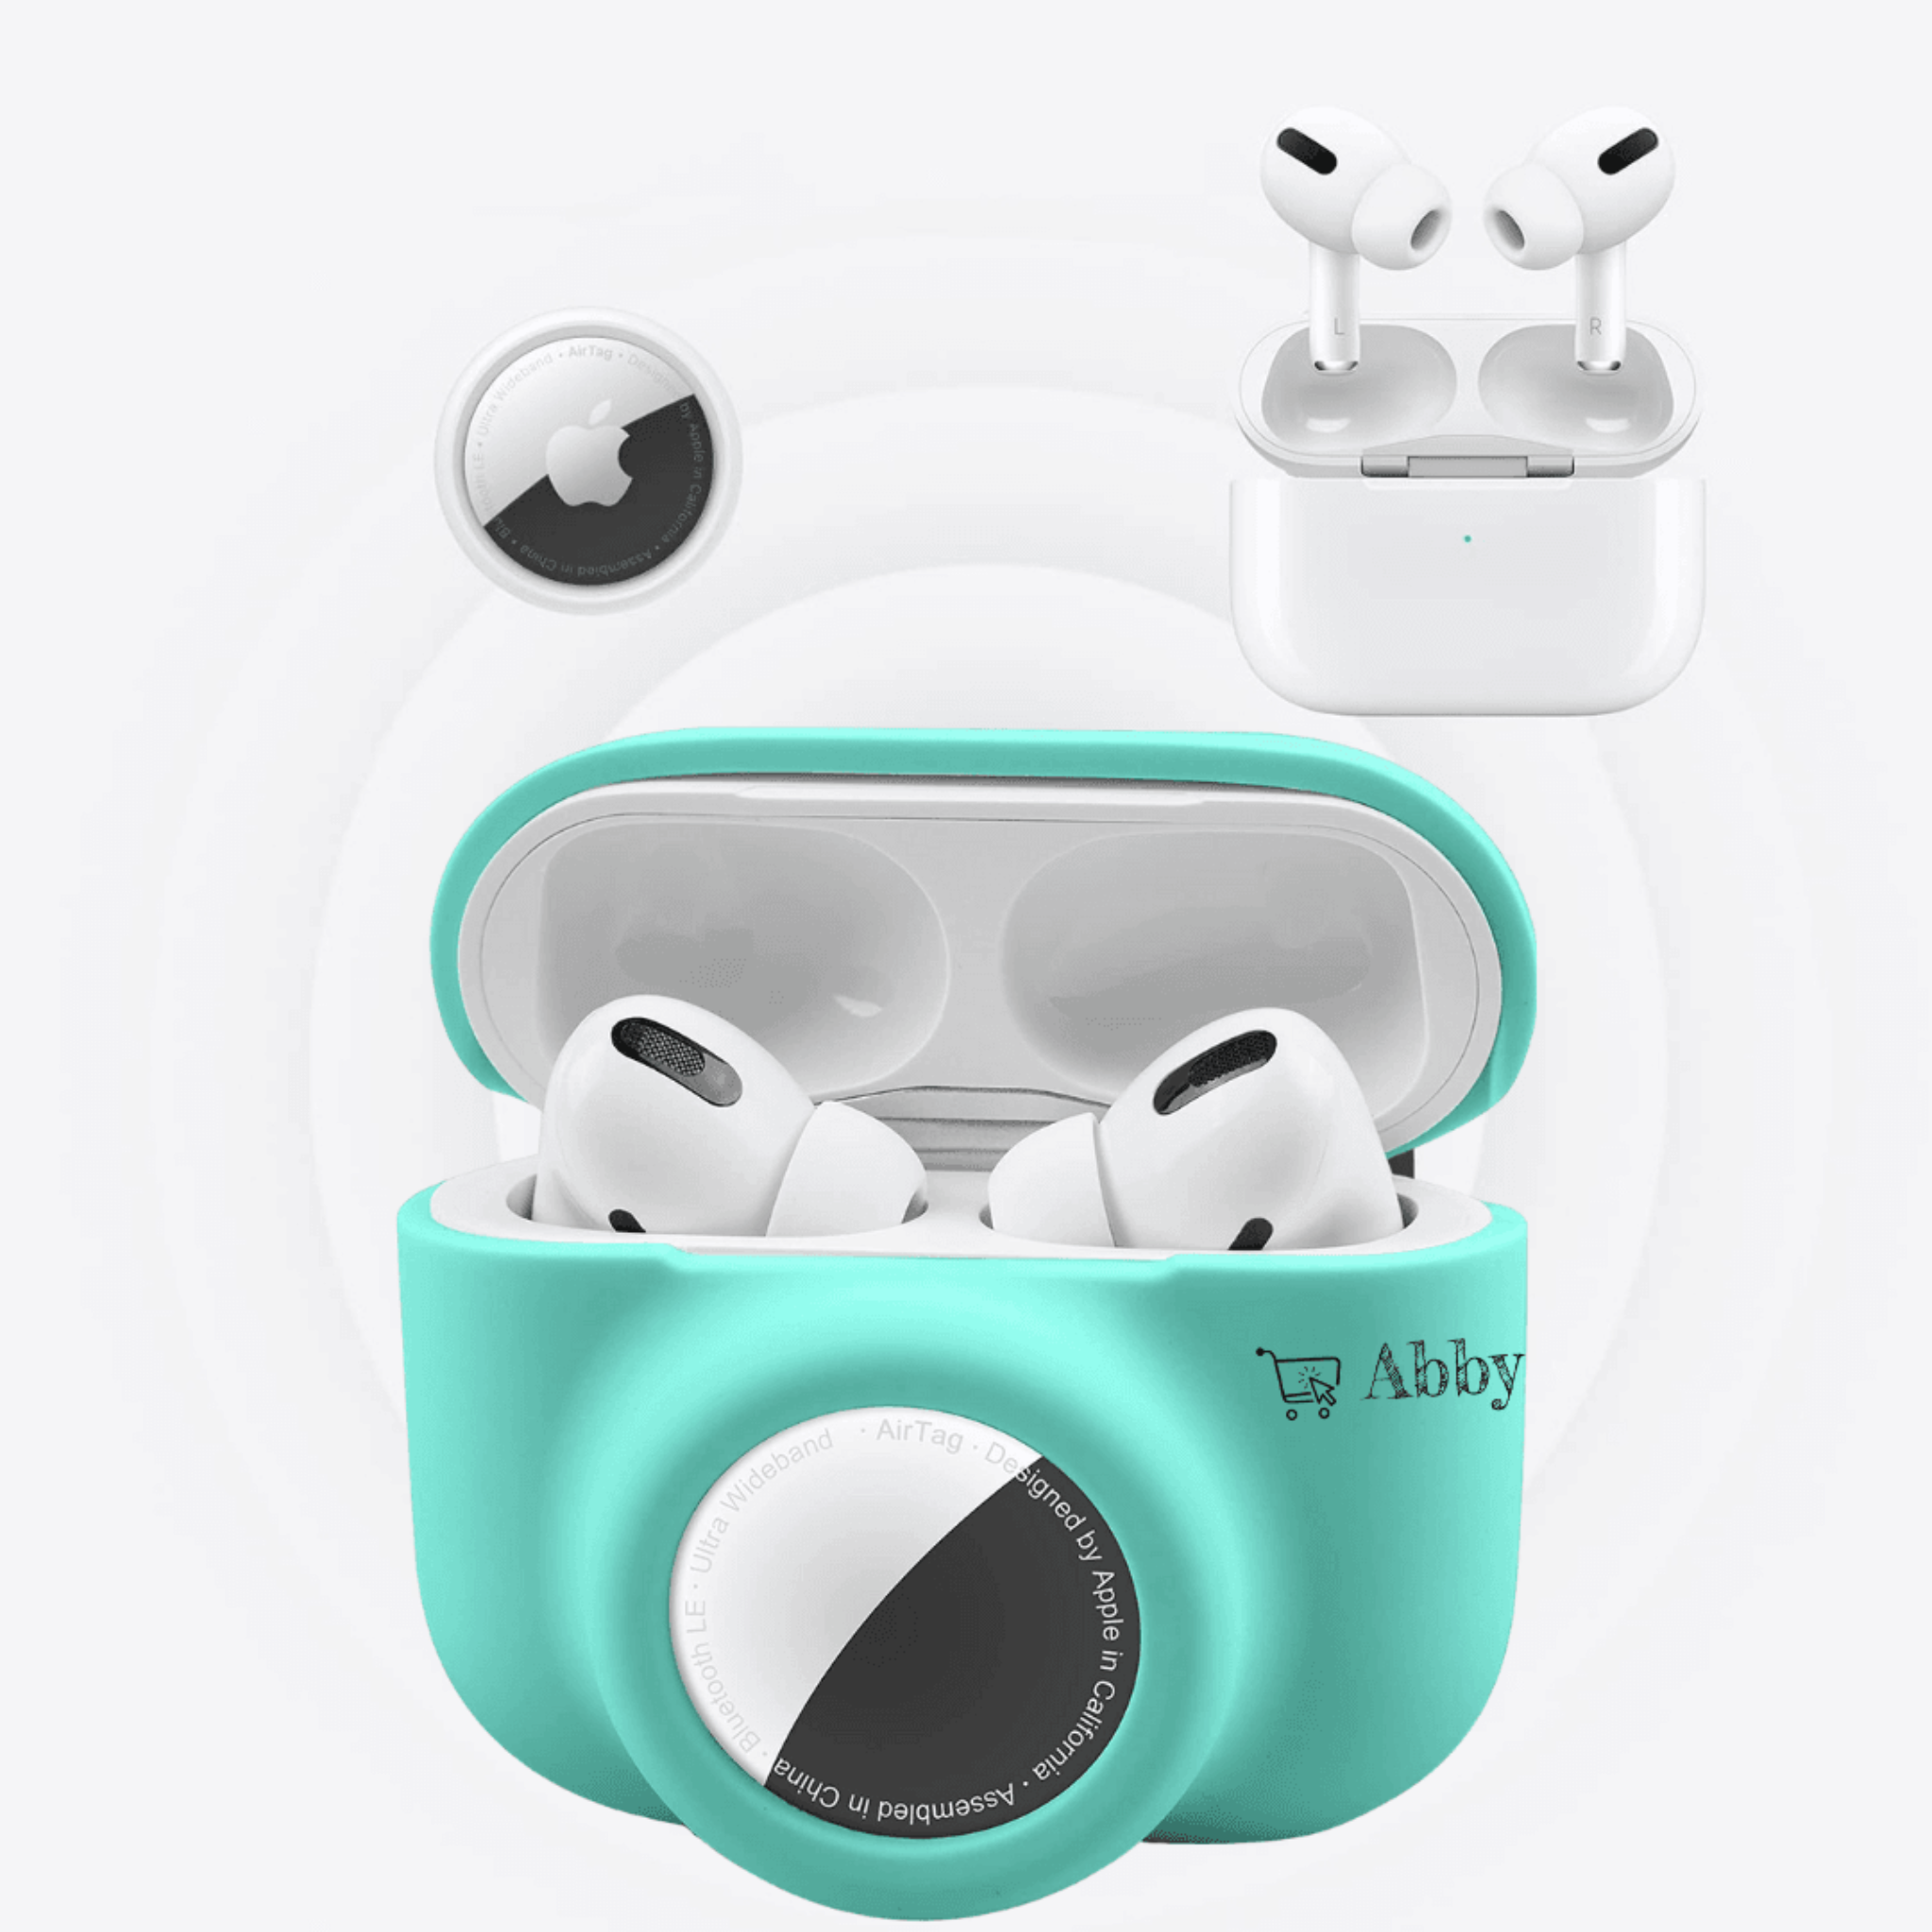 Abby's™ Anti-Lost AirPods Pro Case for Apple AirTag - Abbycart